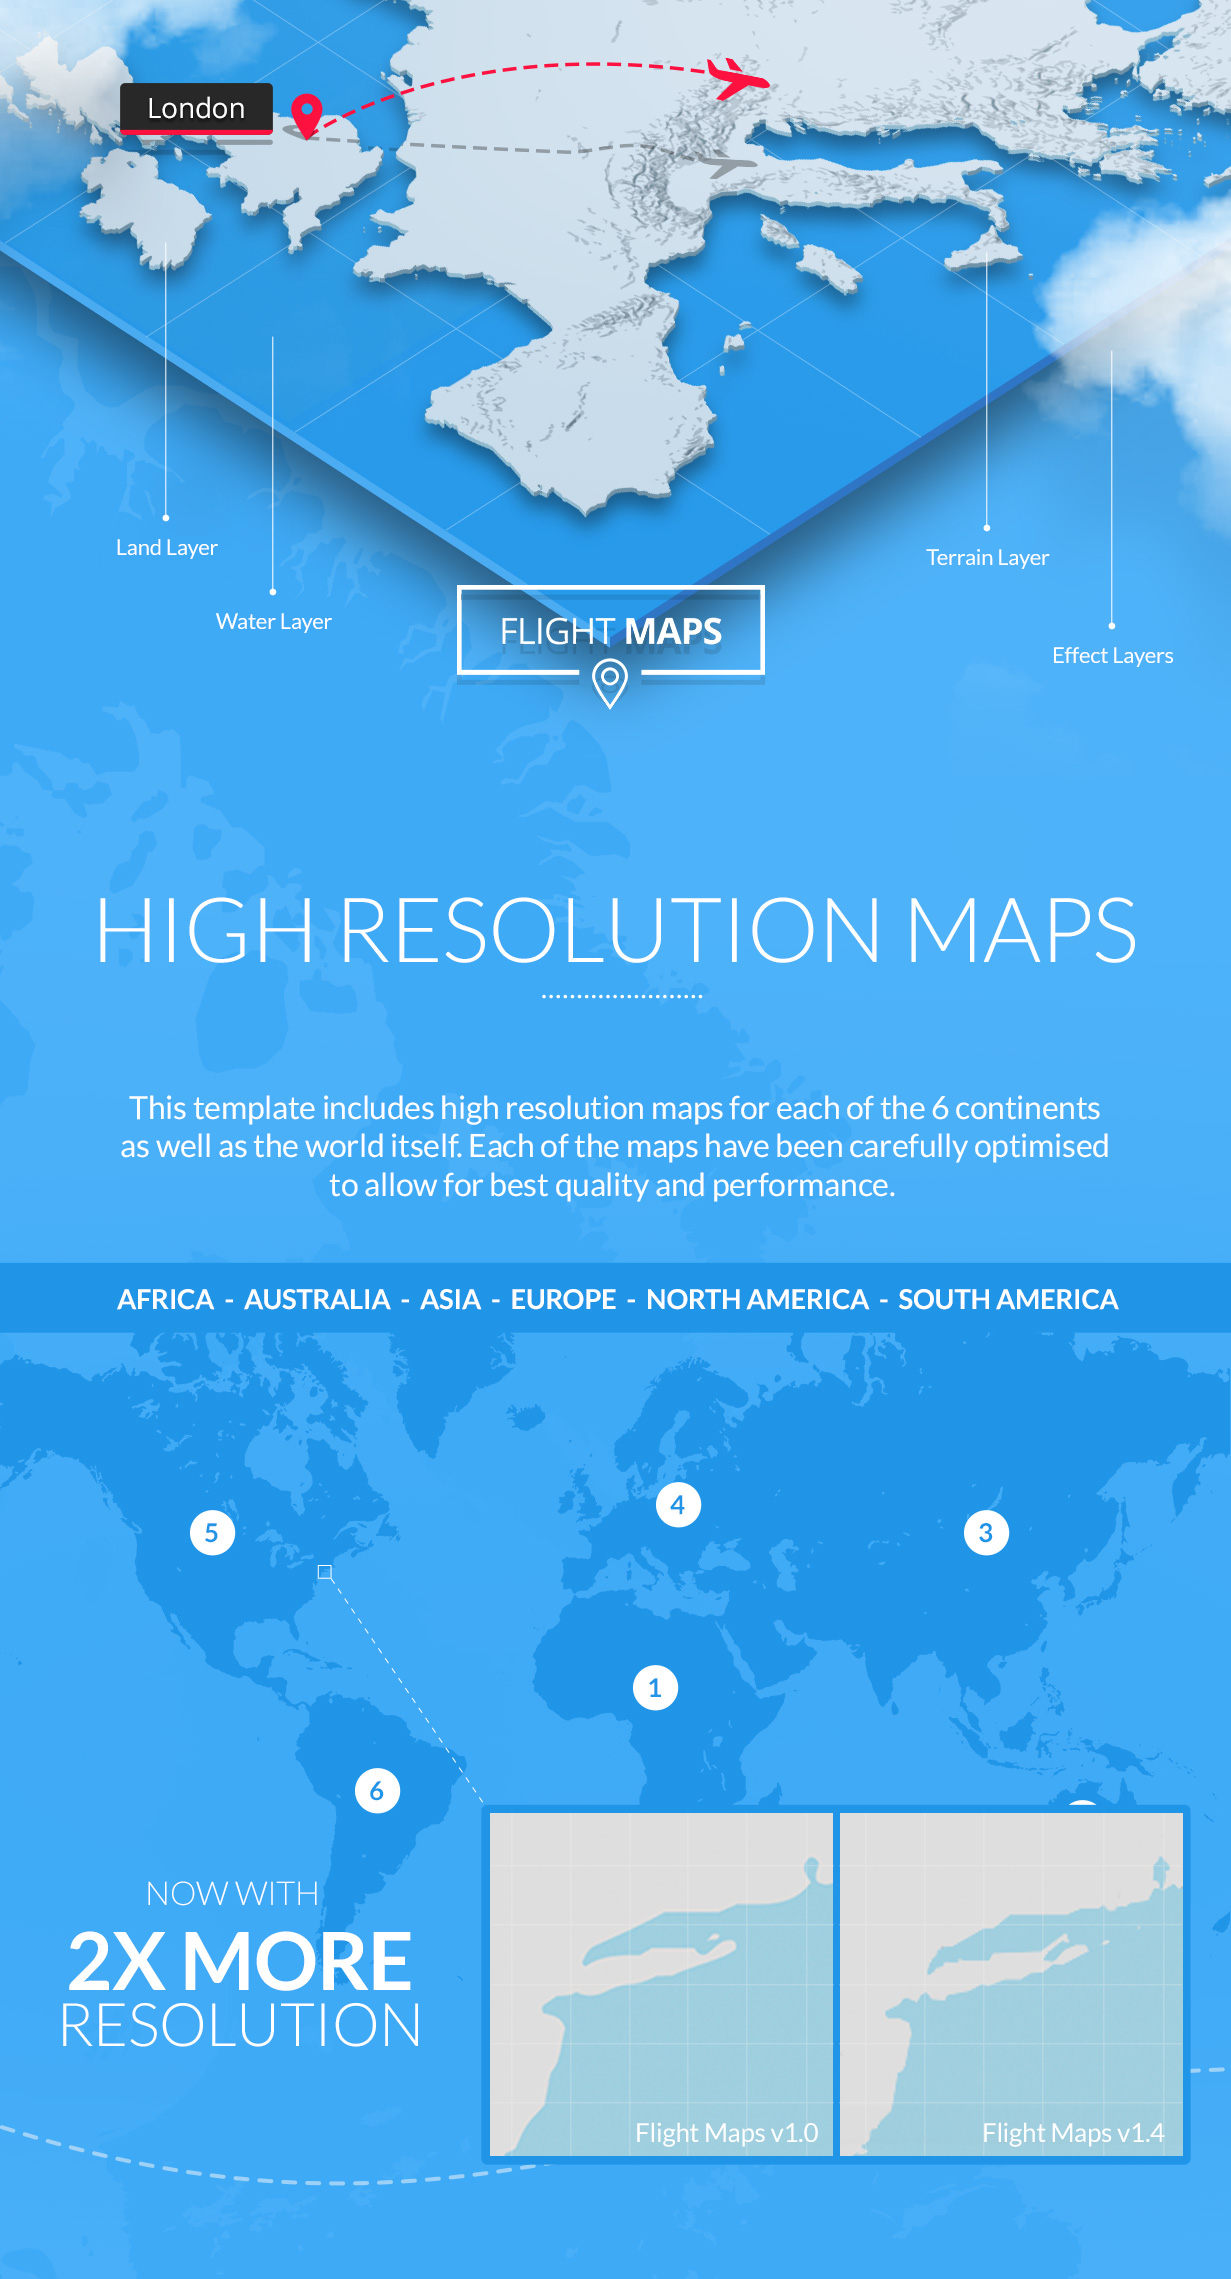 Flight Maps - Visualize Where You're Travelling - 2